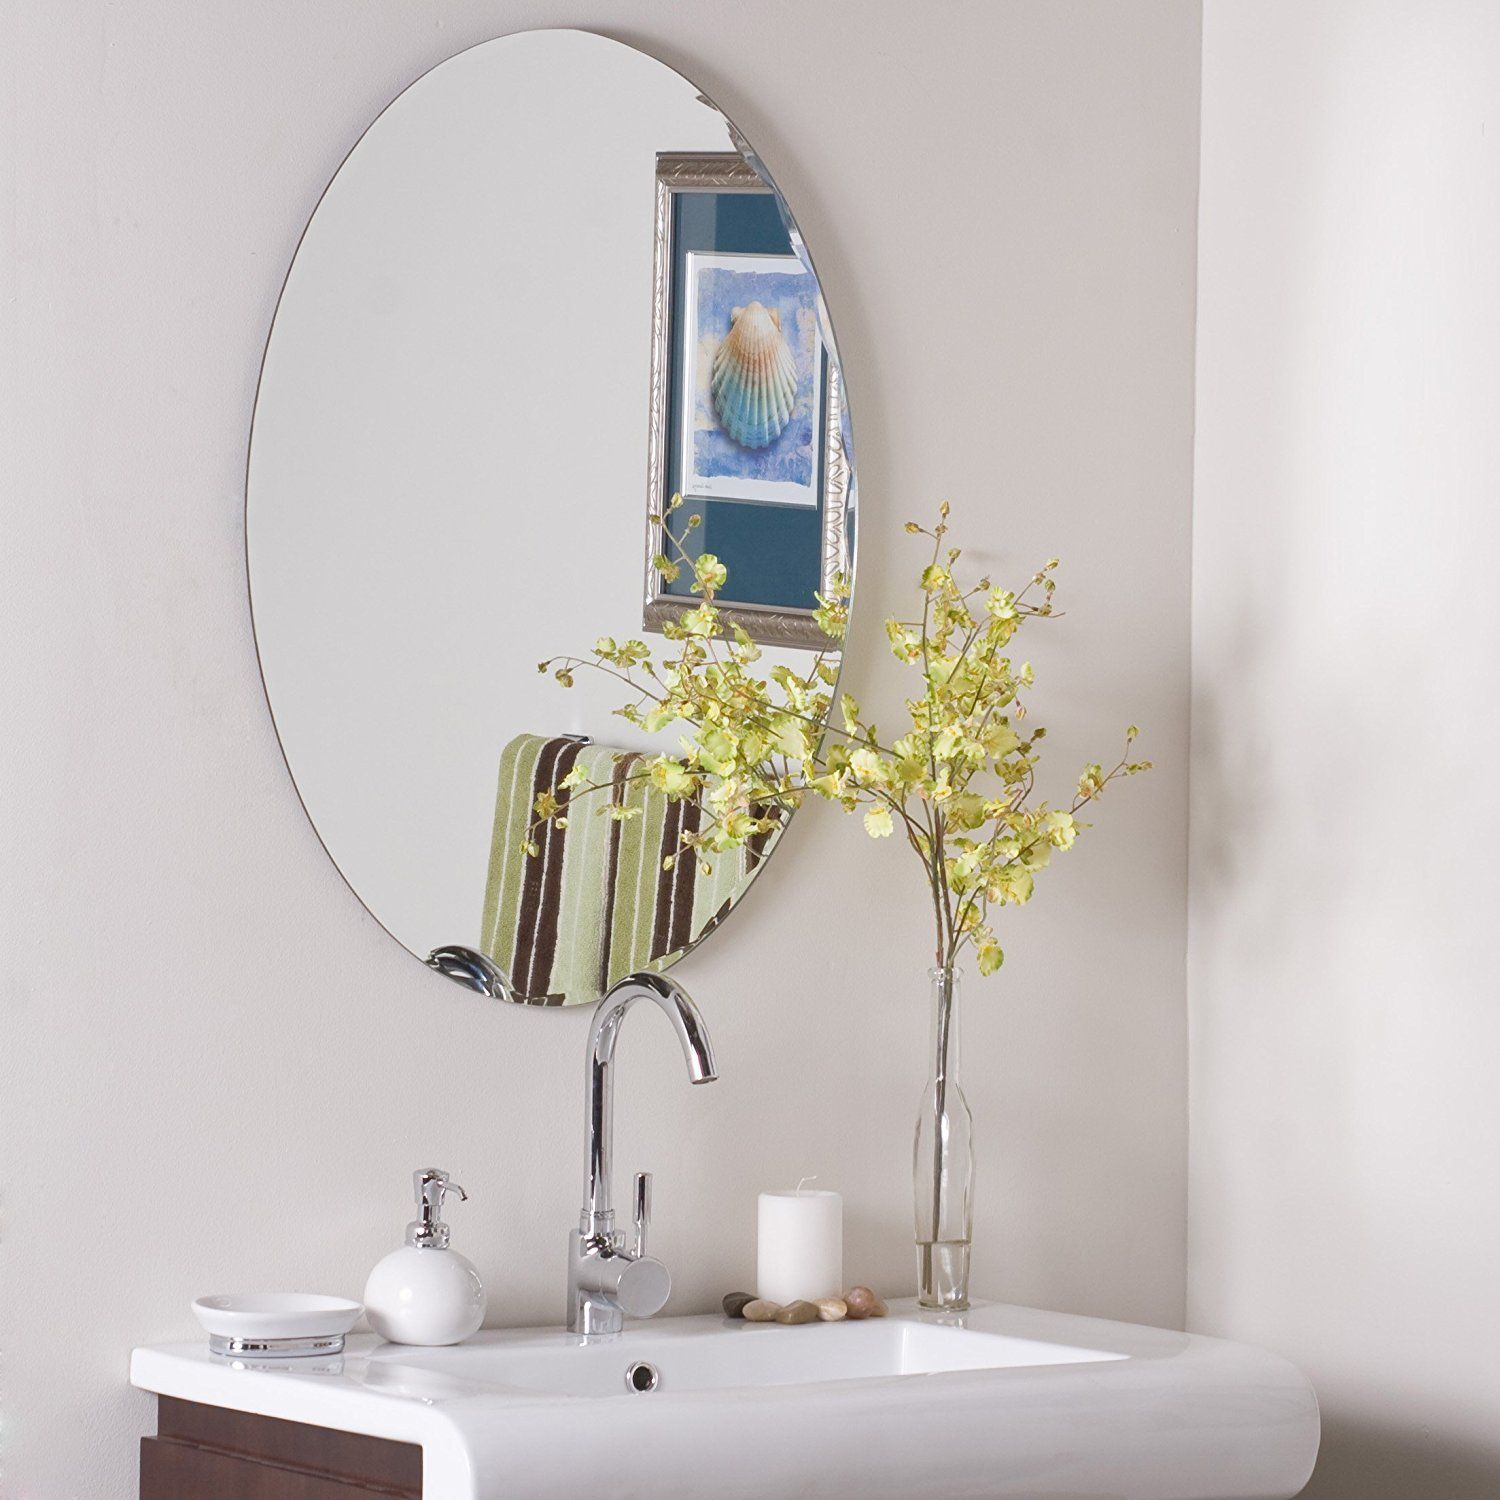 Decor Wonderland Frameless Oval Scallop Beveled Mirror >>> You Can Find With Regard To Reign Frameless Oval Scalloped Beveled Wall Mirrors (View 13 of 15)